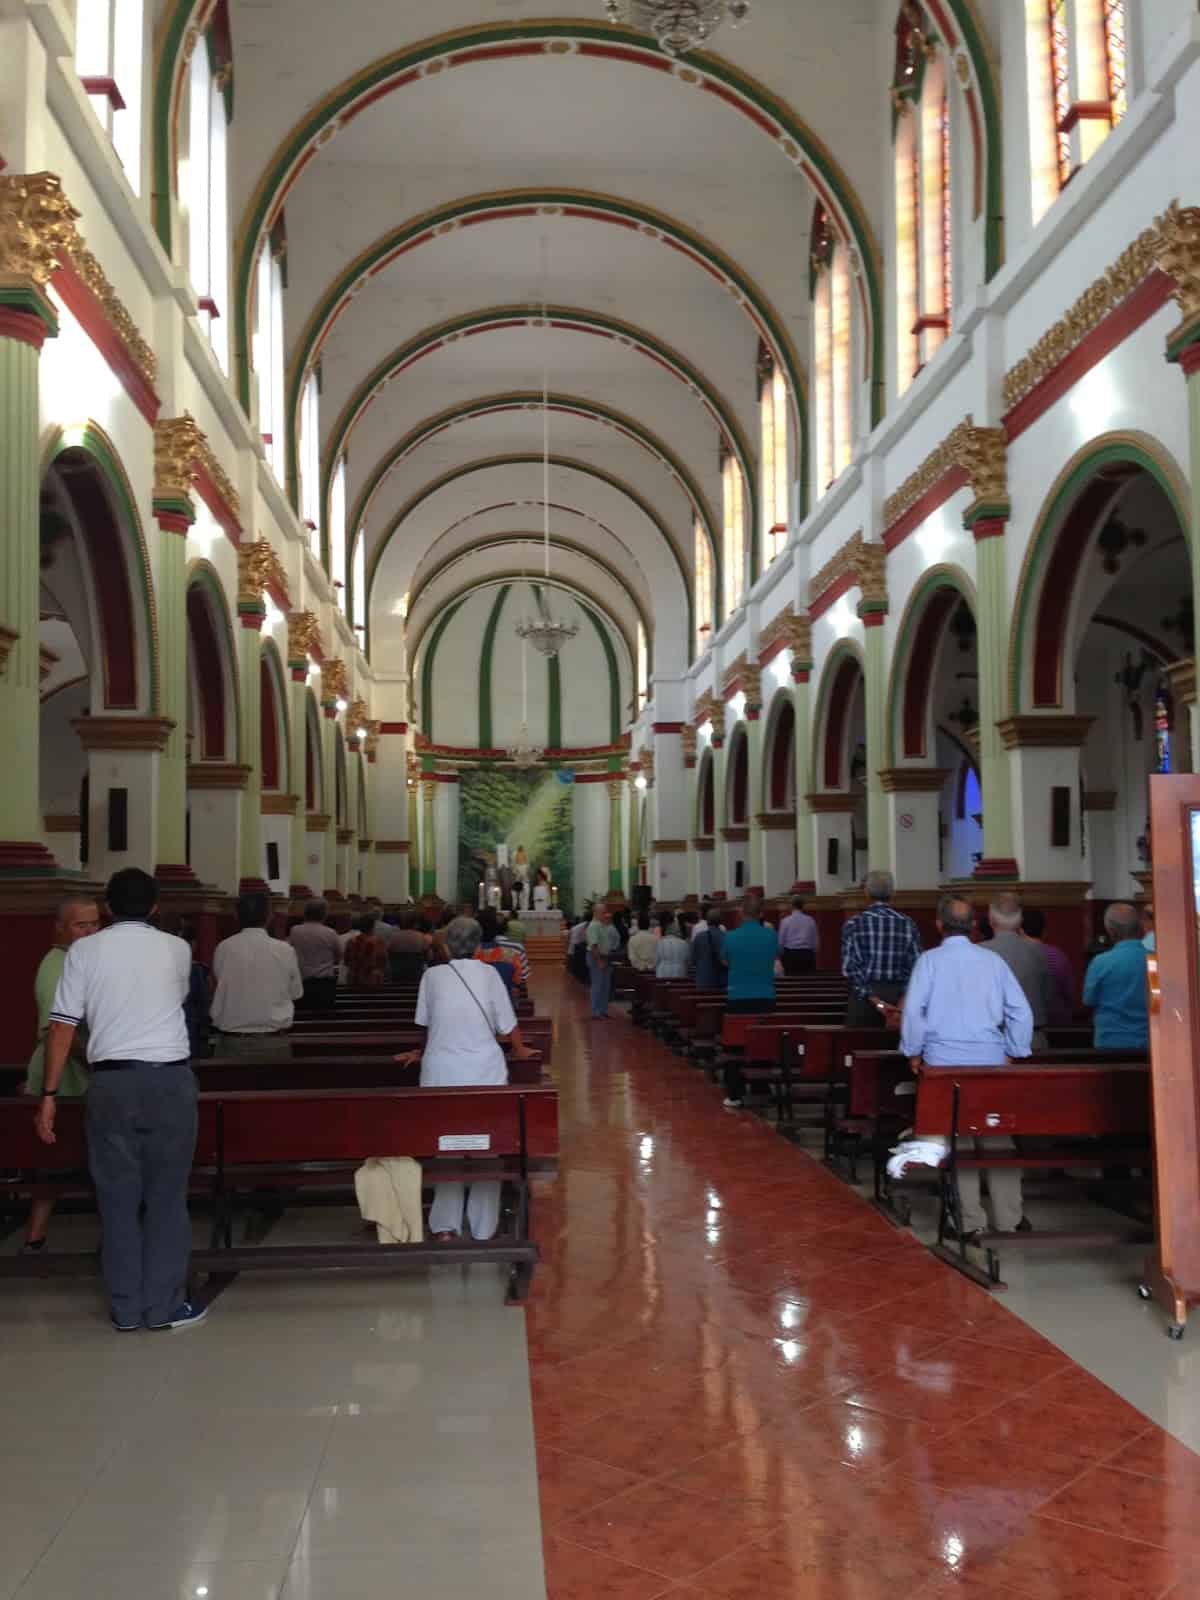 Interior of Our Lady of Mount Carmel in Caicedonia, Valle del Cauca, Colombia